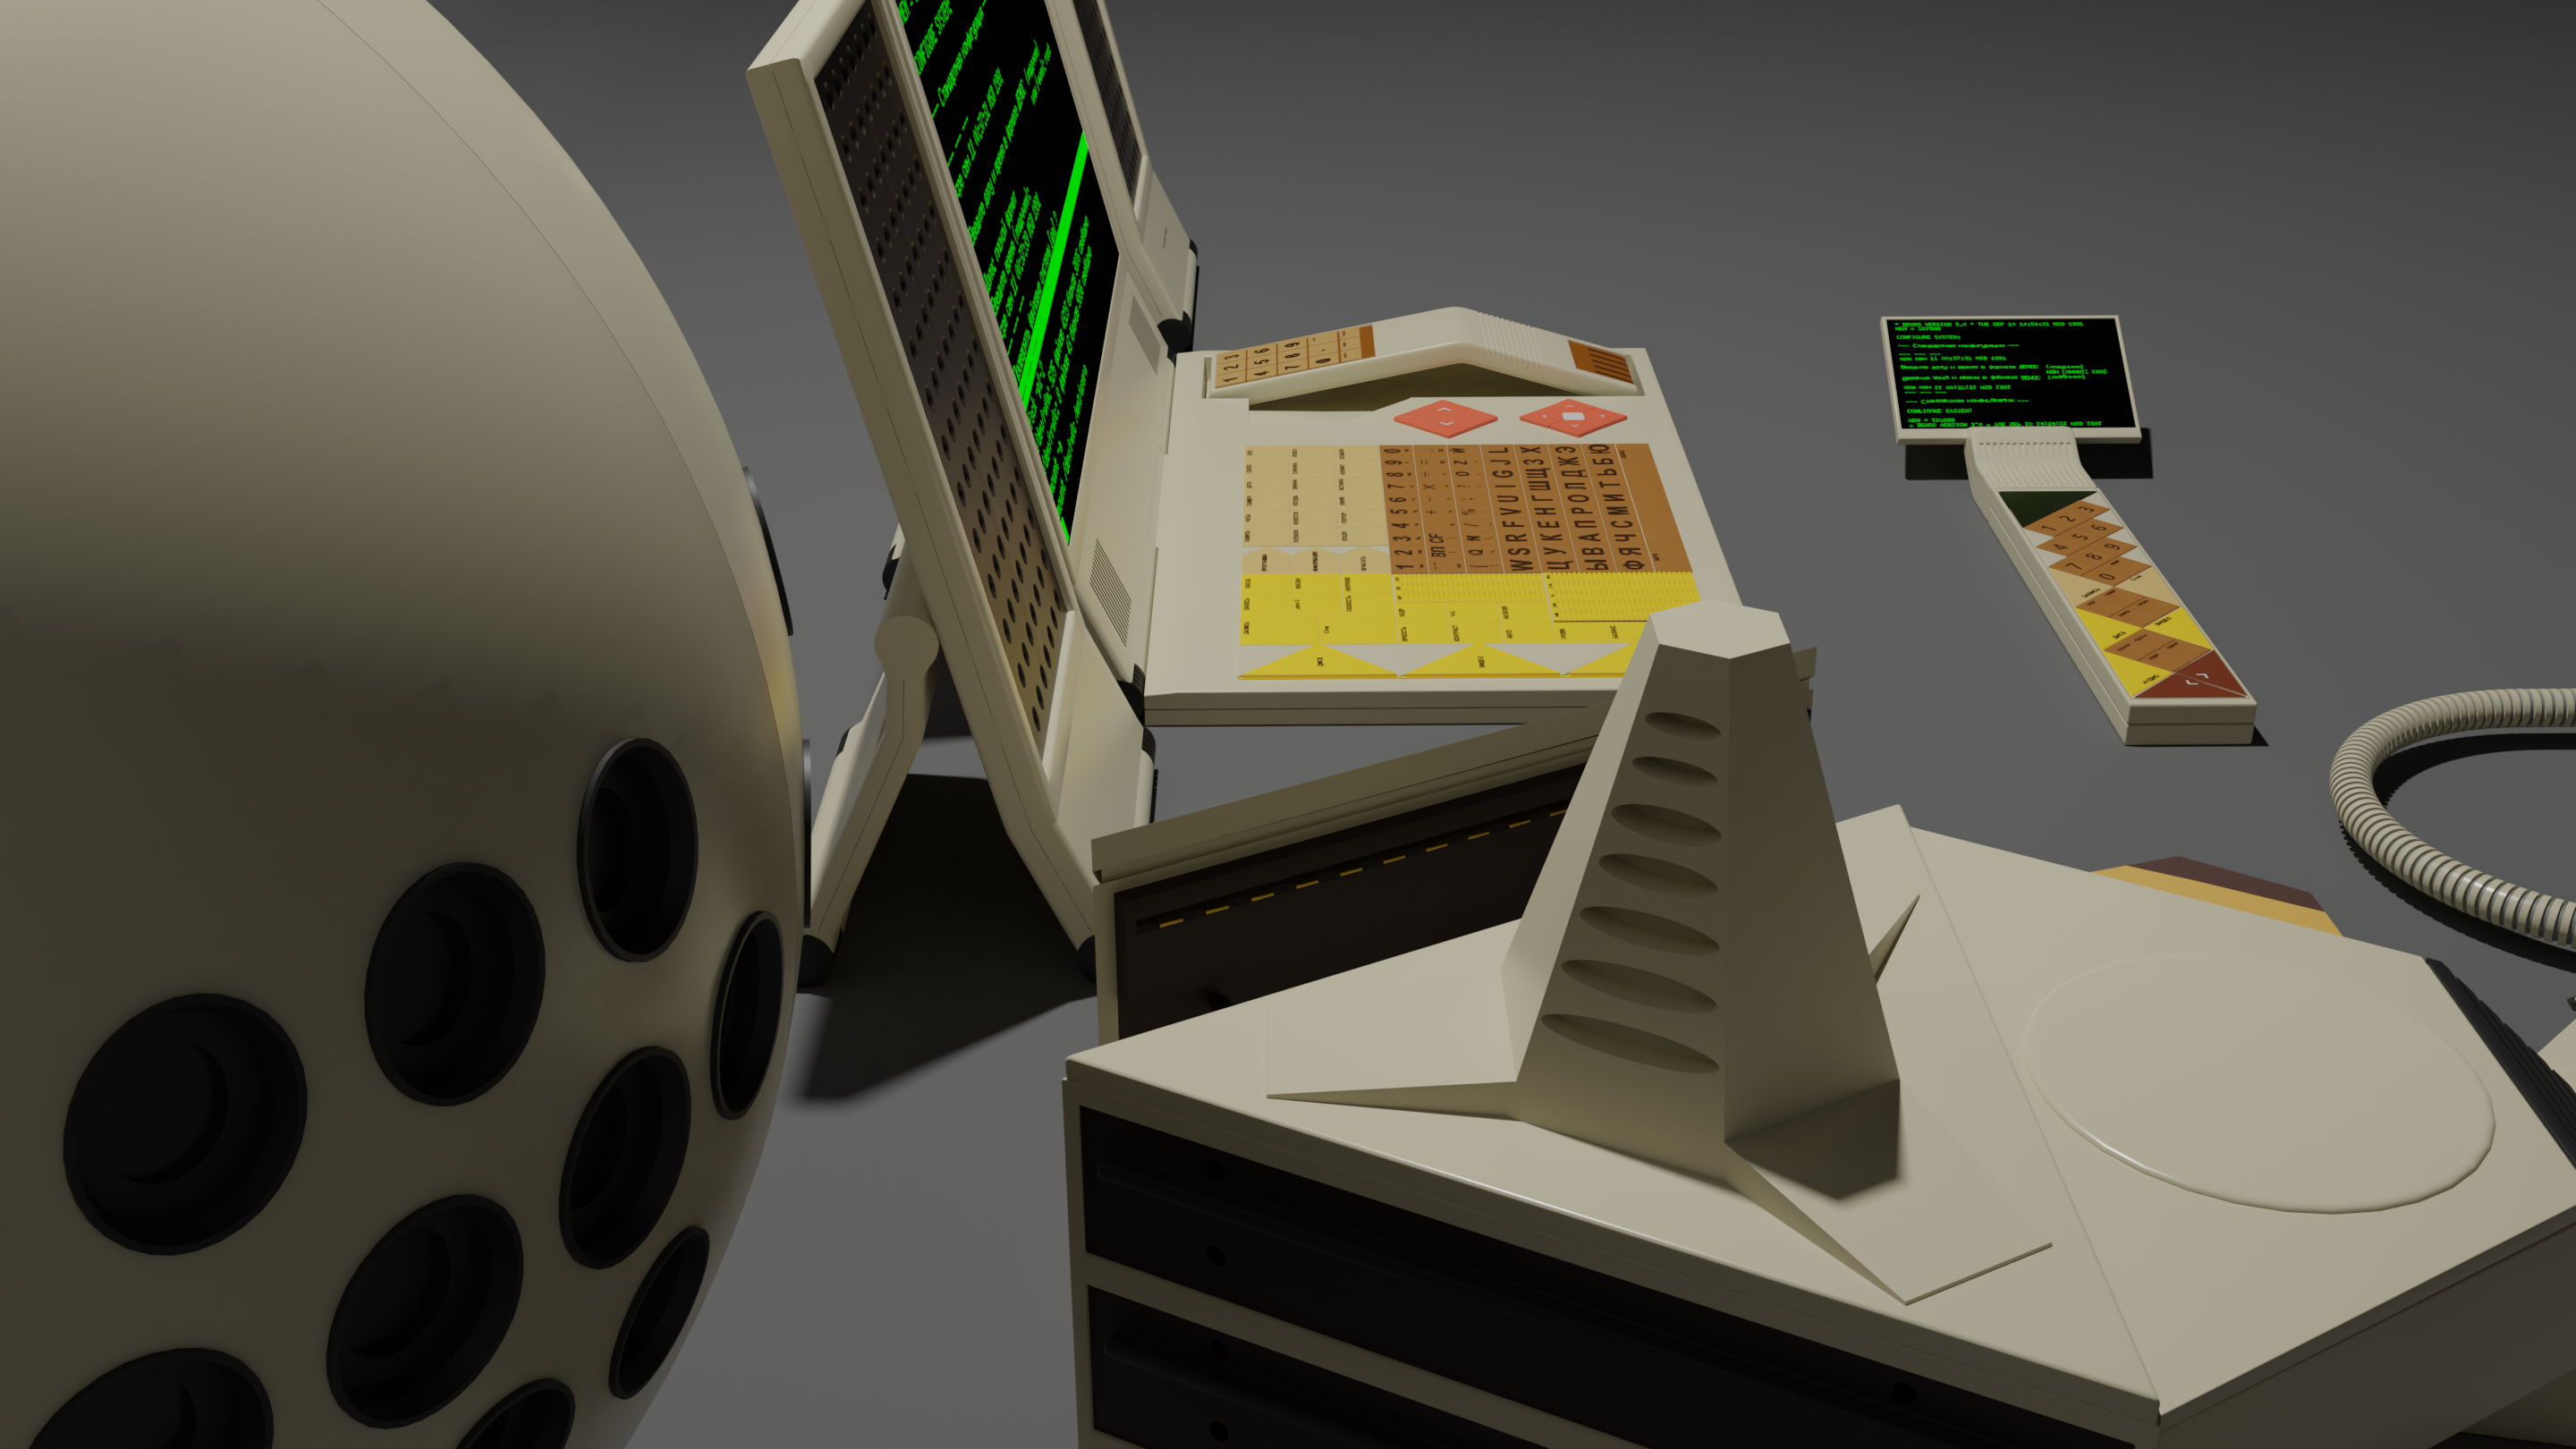 Project Sphinx (СФИНКС) Computer System preview image 2